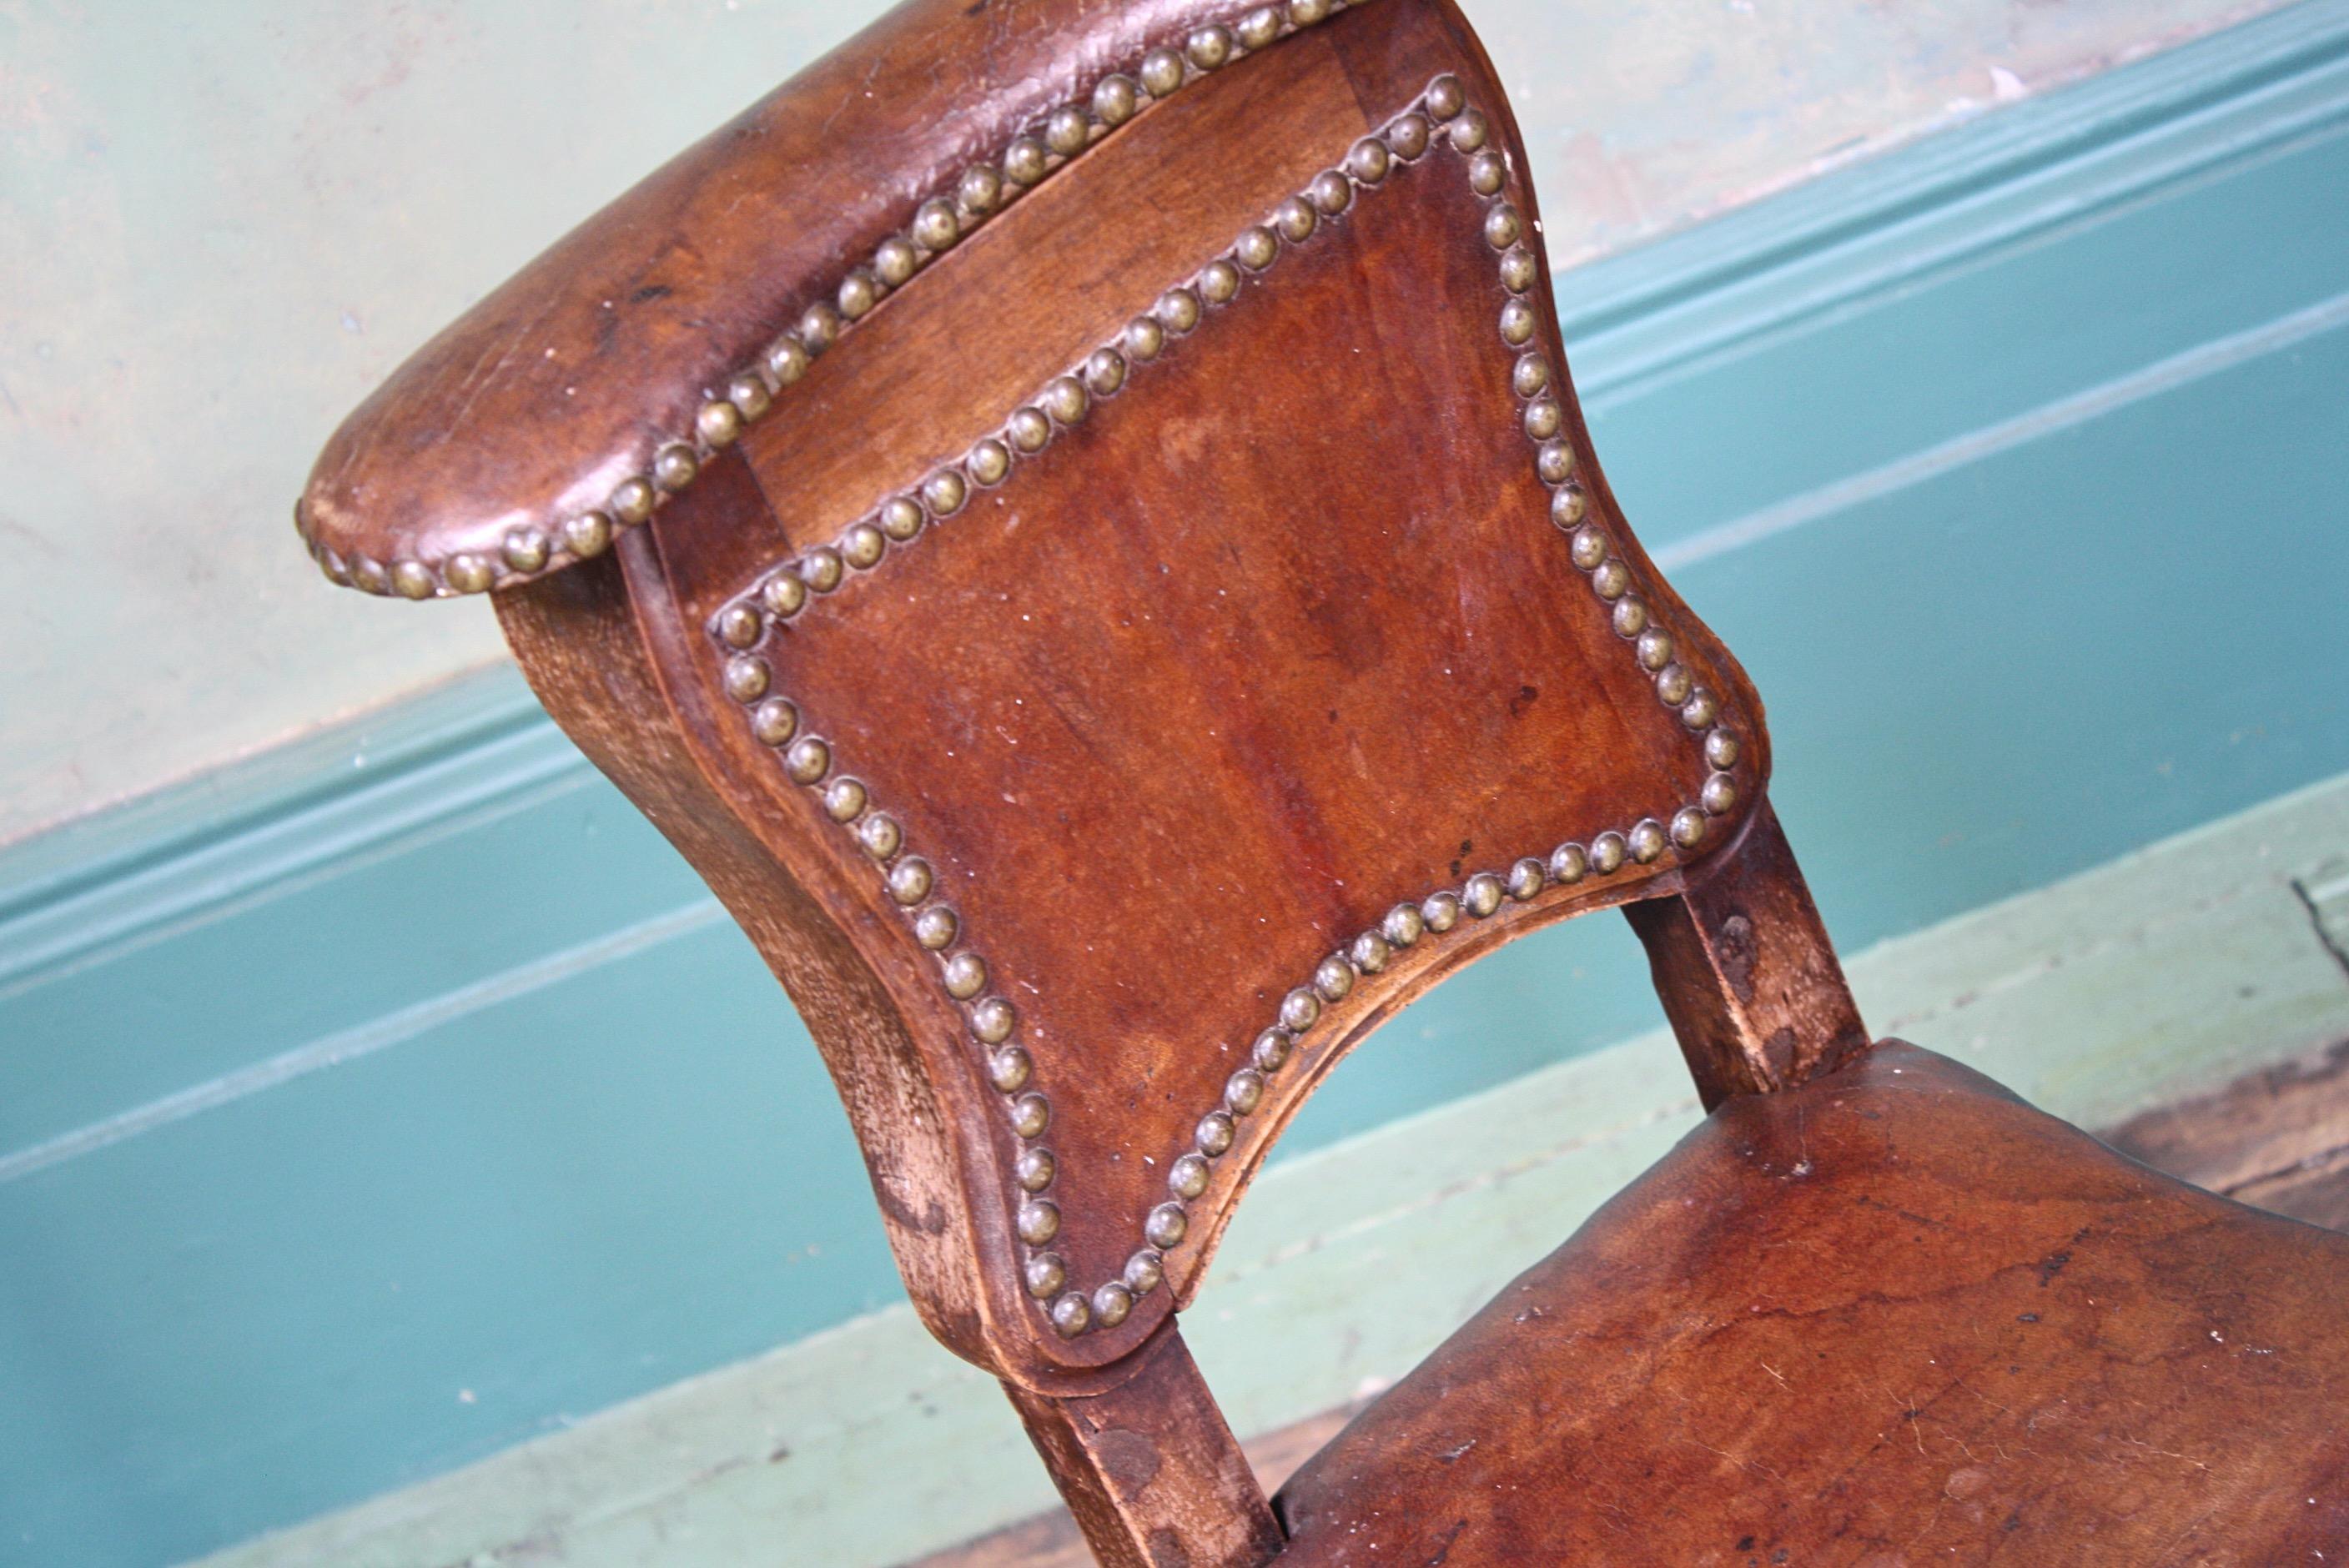 A shapely early 19th century leather and oak chair, upholstered with its original conker brown leather and stud work. 

The chairs original use was to wash from, the seat is removable and would off housed a ceramic bowl. Also the small decorative